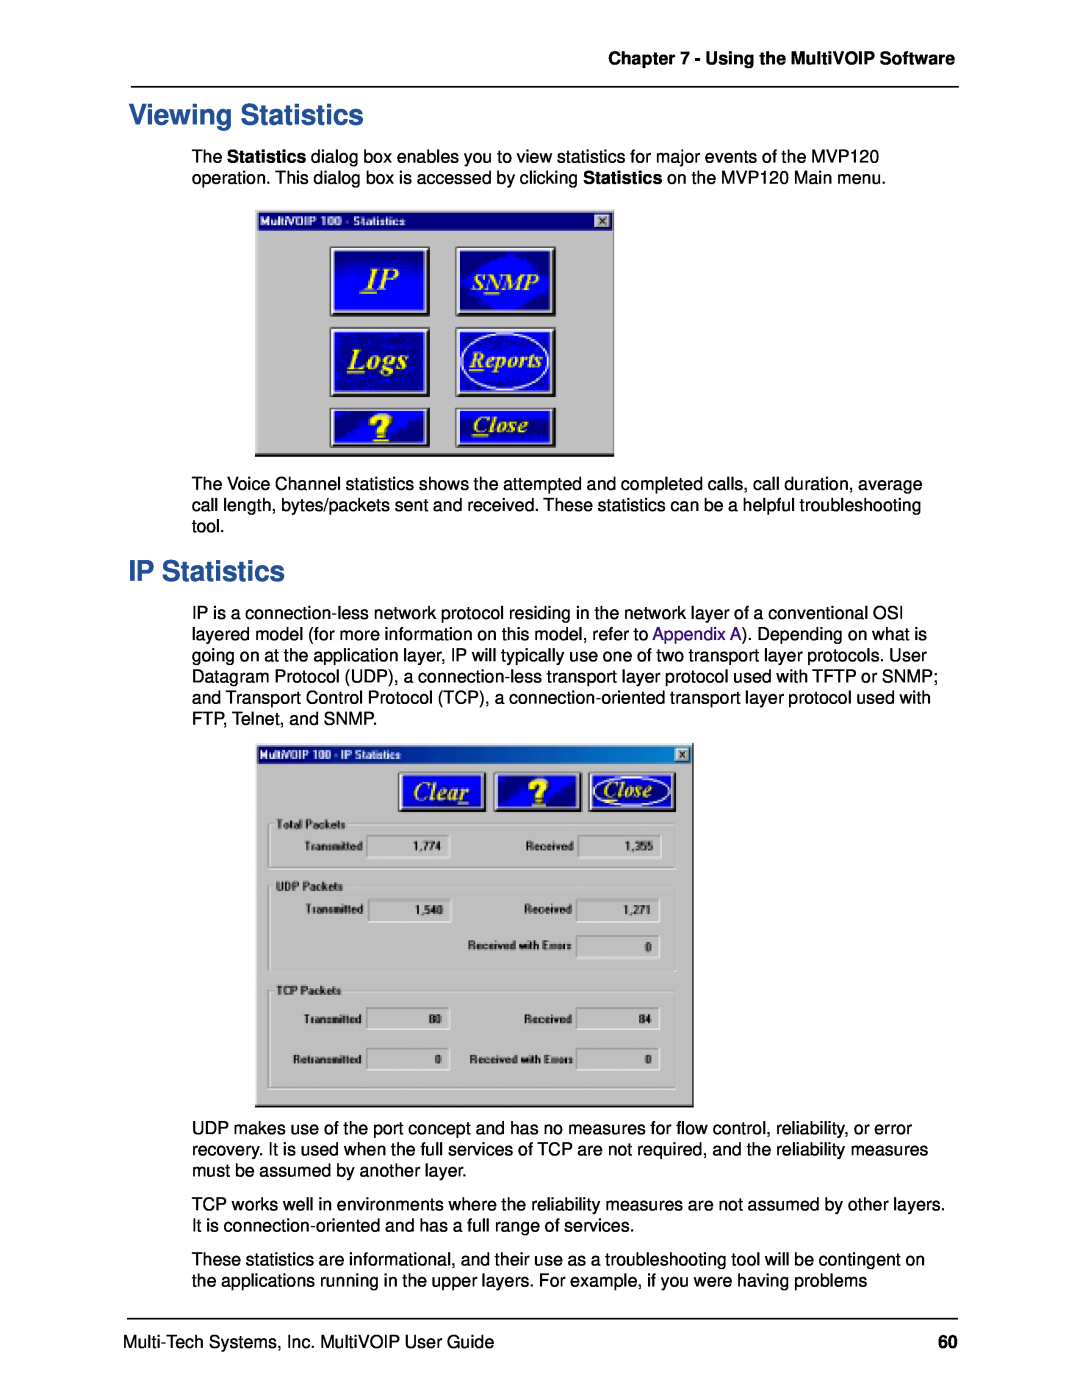 Multi-Tech Systems MVP120 manual Viewing Statistics, IP Statistics, Using the MultiVOIP Software 